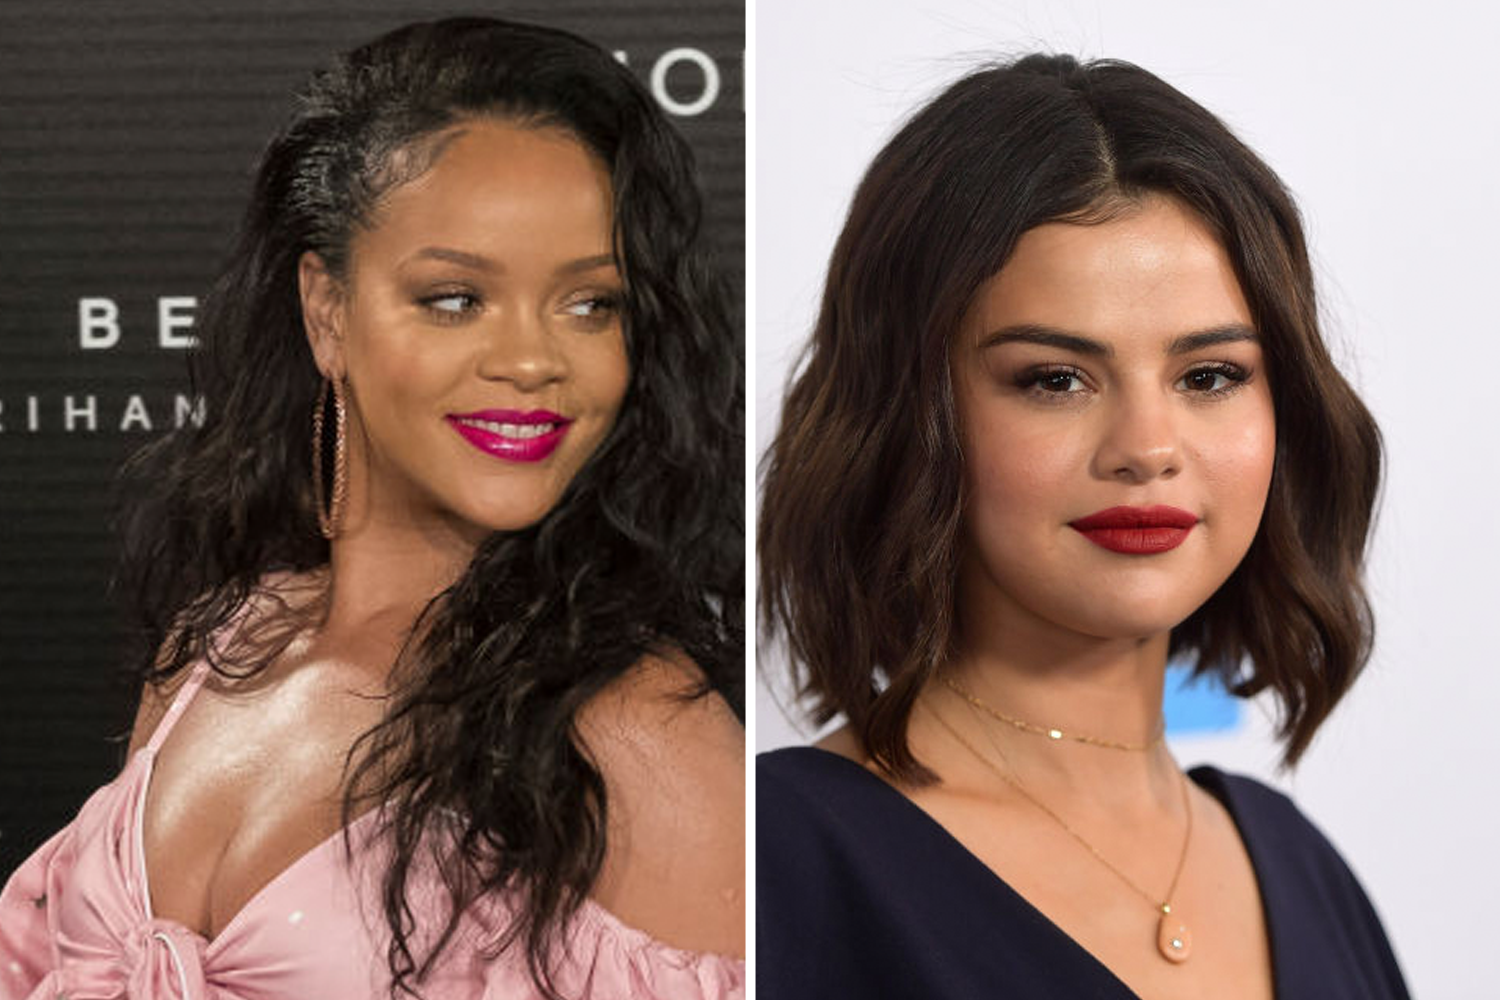 How Well Do You Really Know Celebrity's Ages?